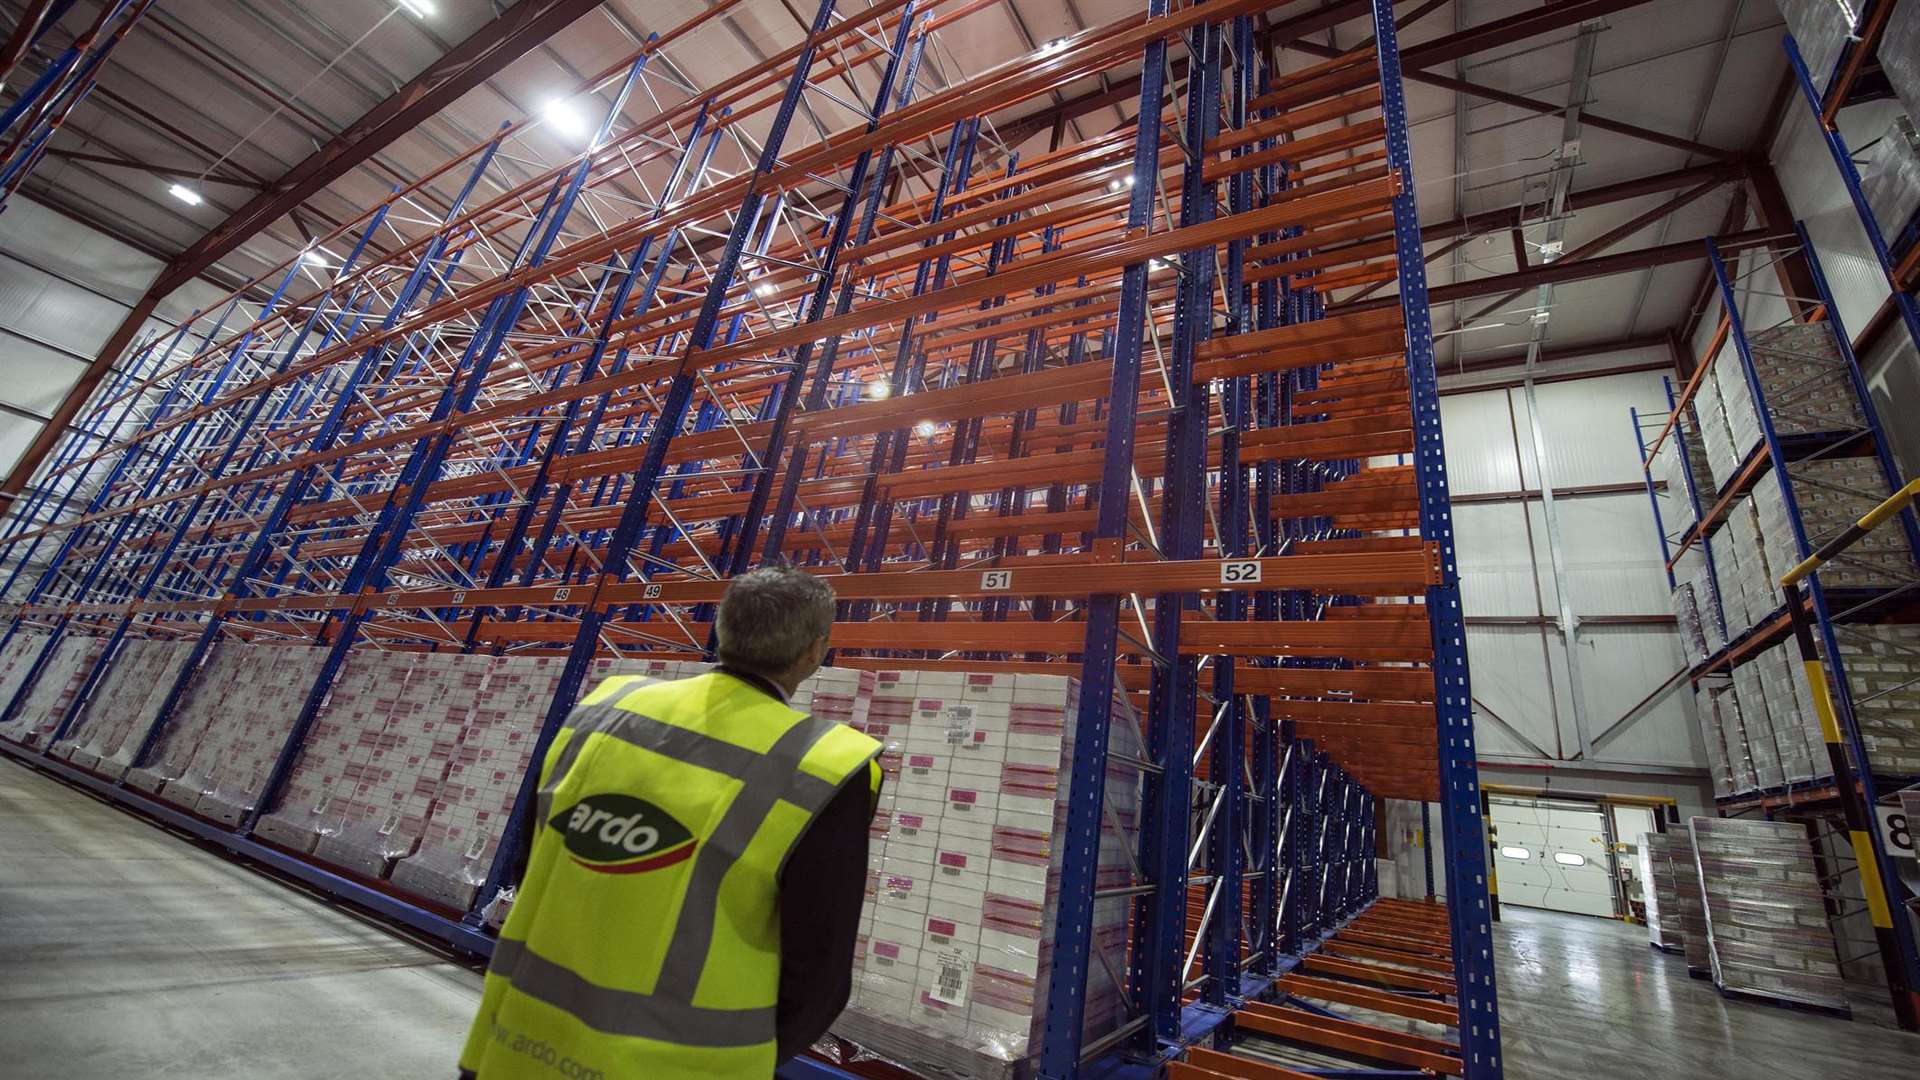 Ardo UK can handle 35,000 pallets a month but Operation Stack sets off a chain reaction of disruption